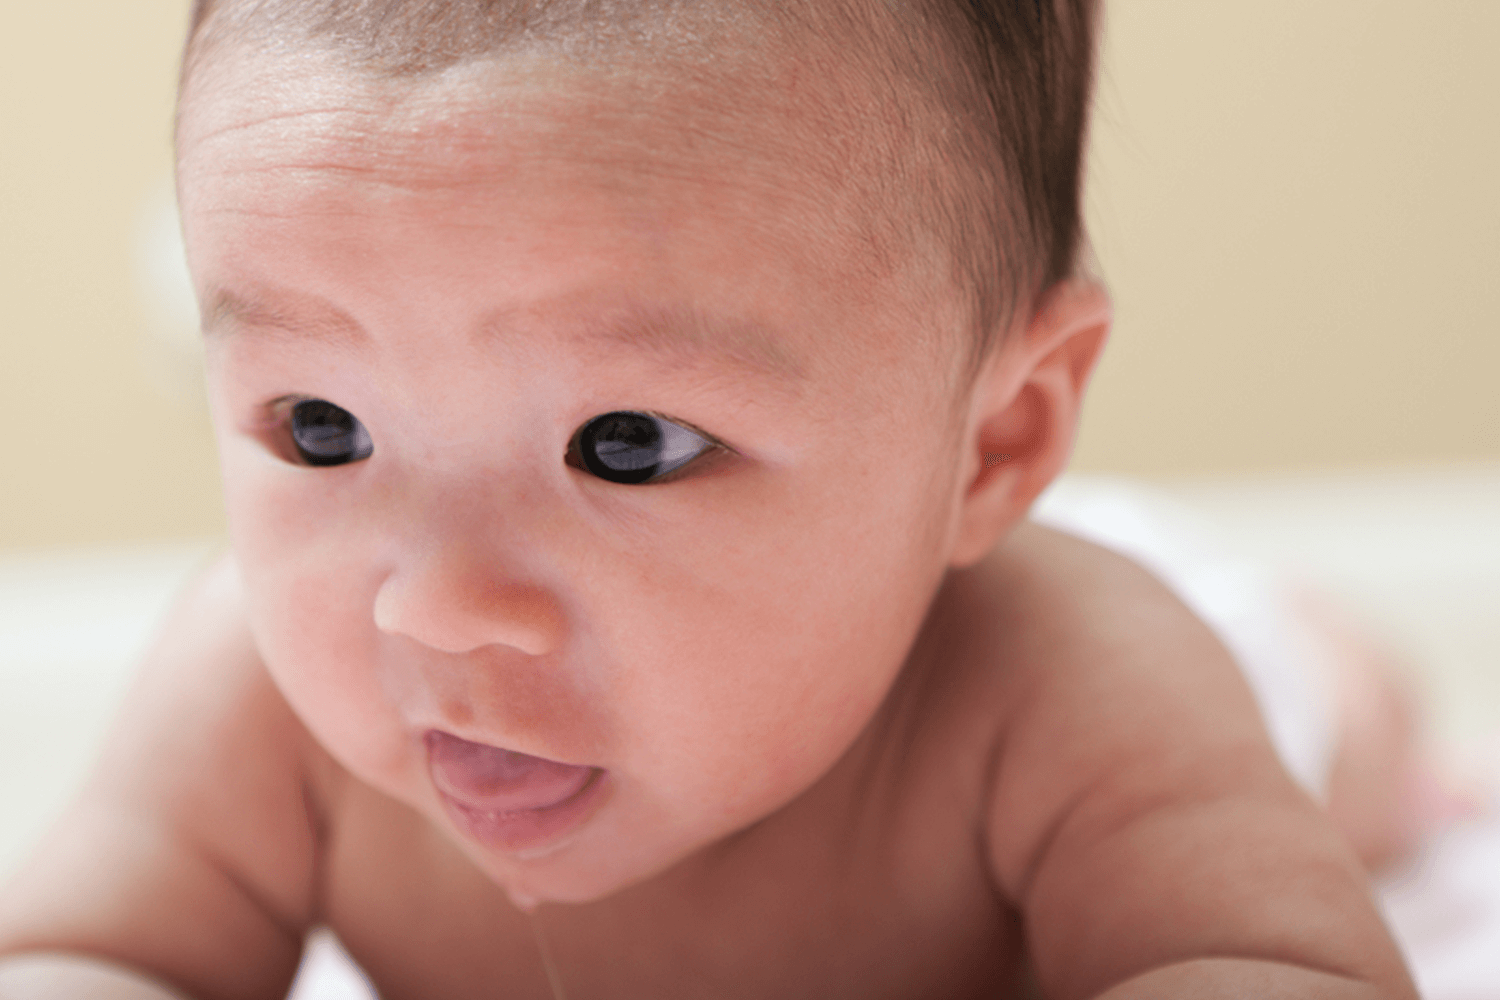 Baby Drooling? 5 Revealing Things About 